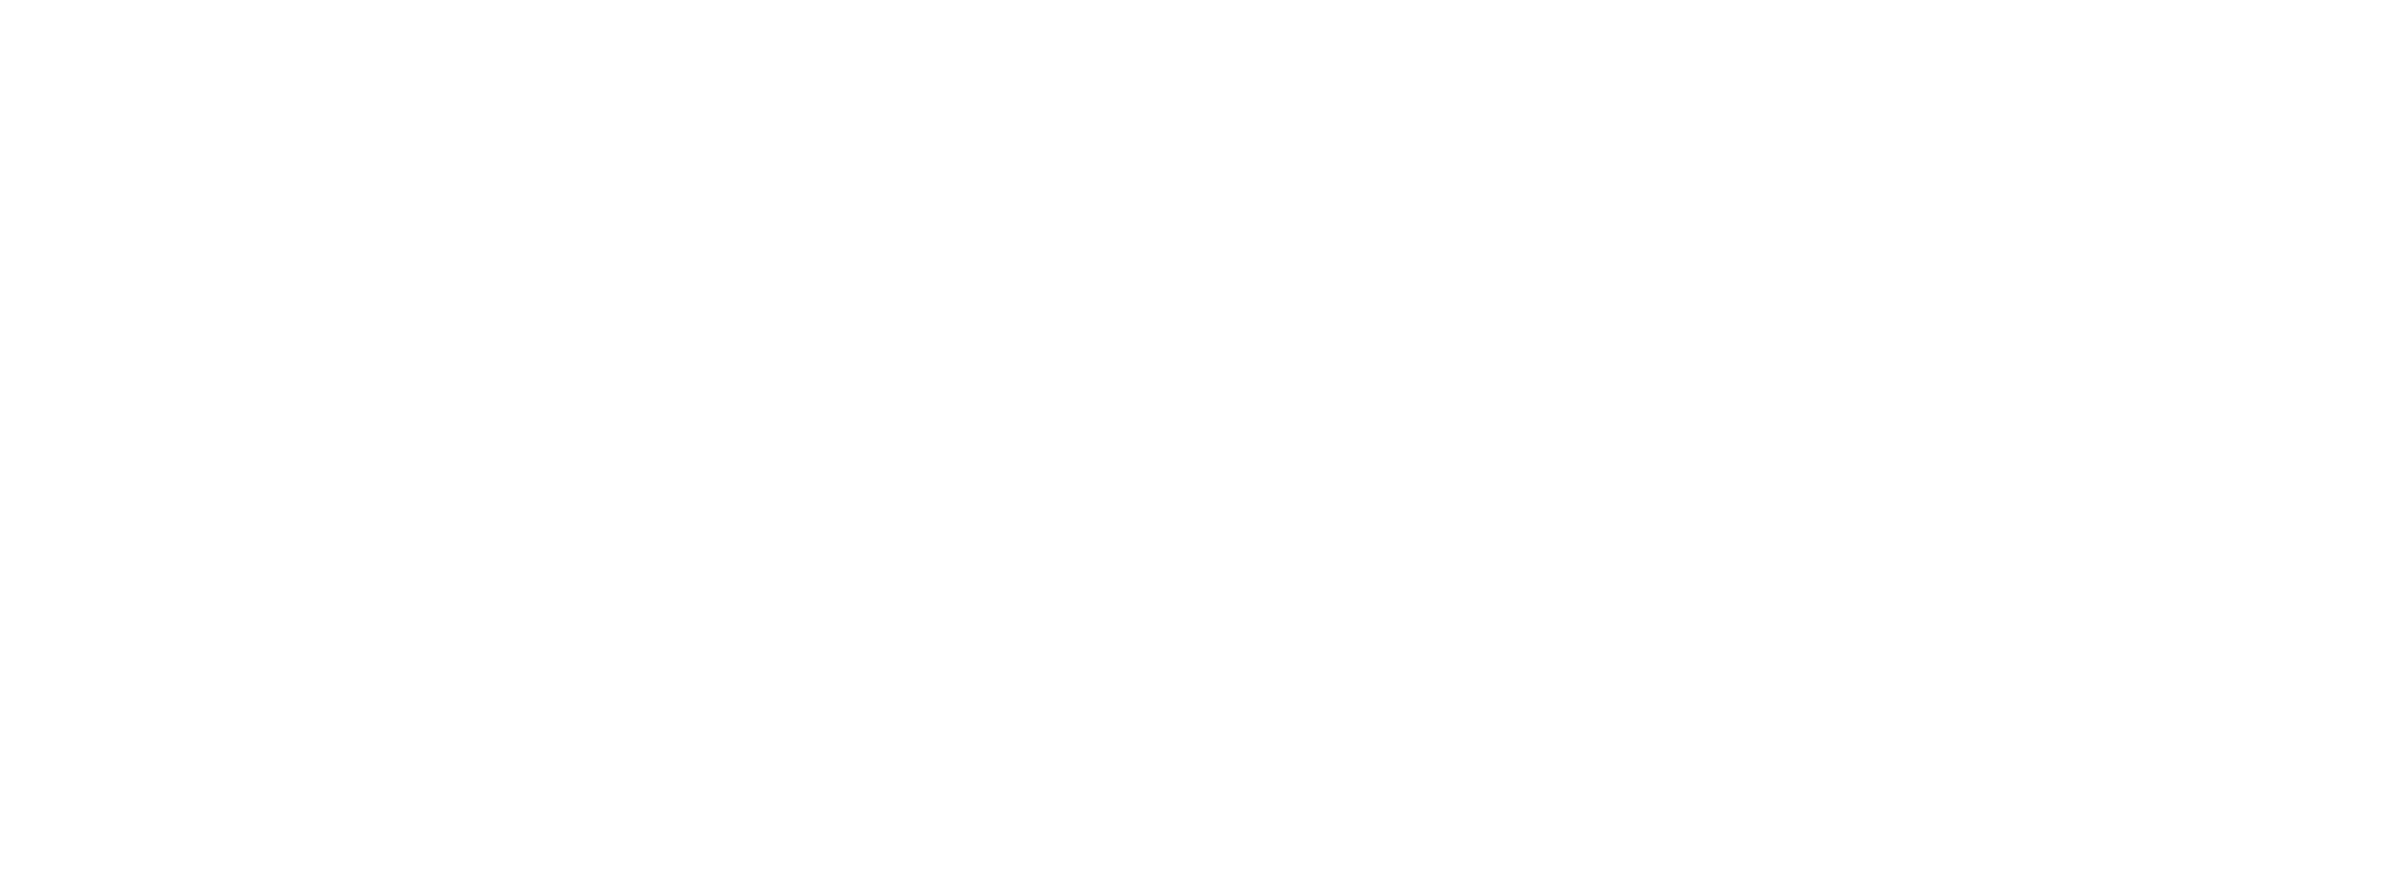 forbes logo black and white